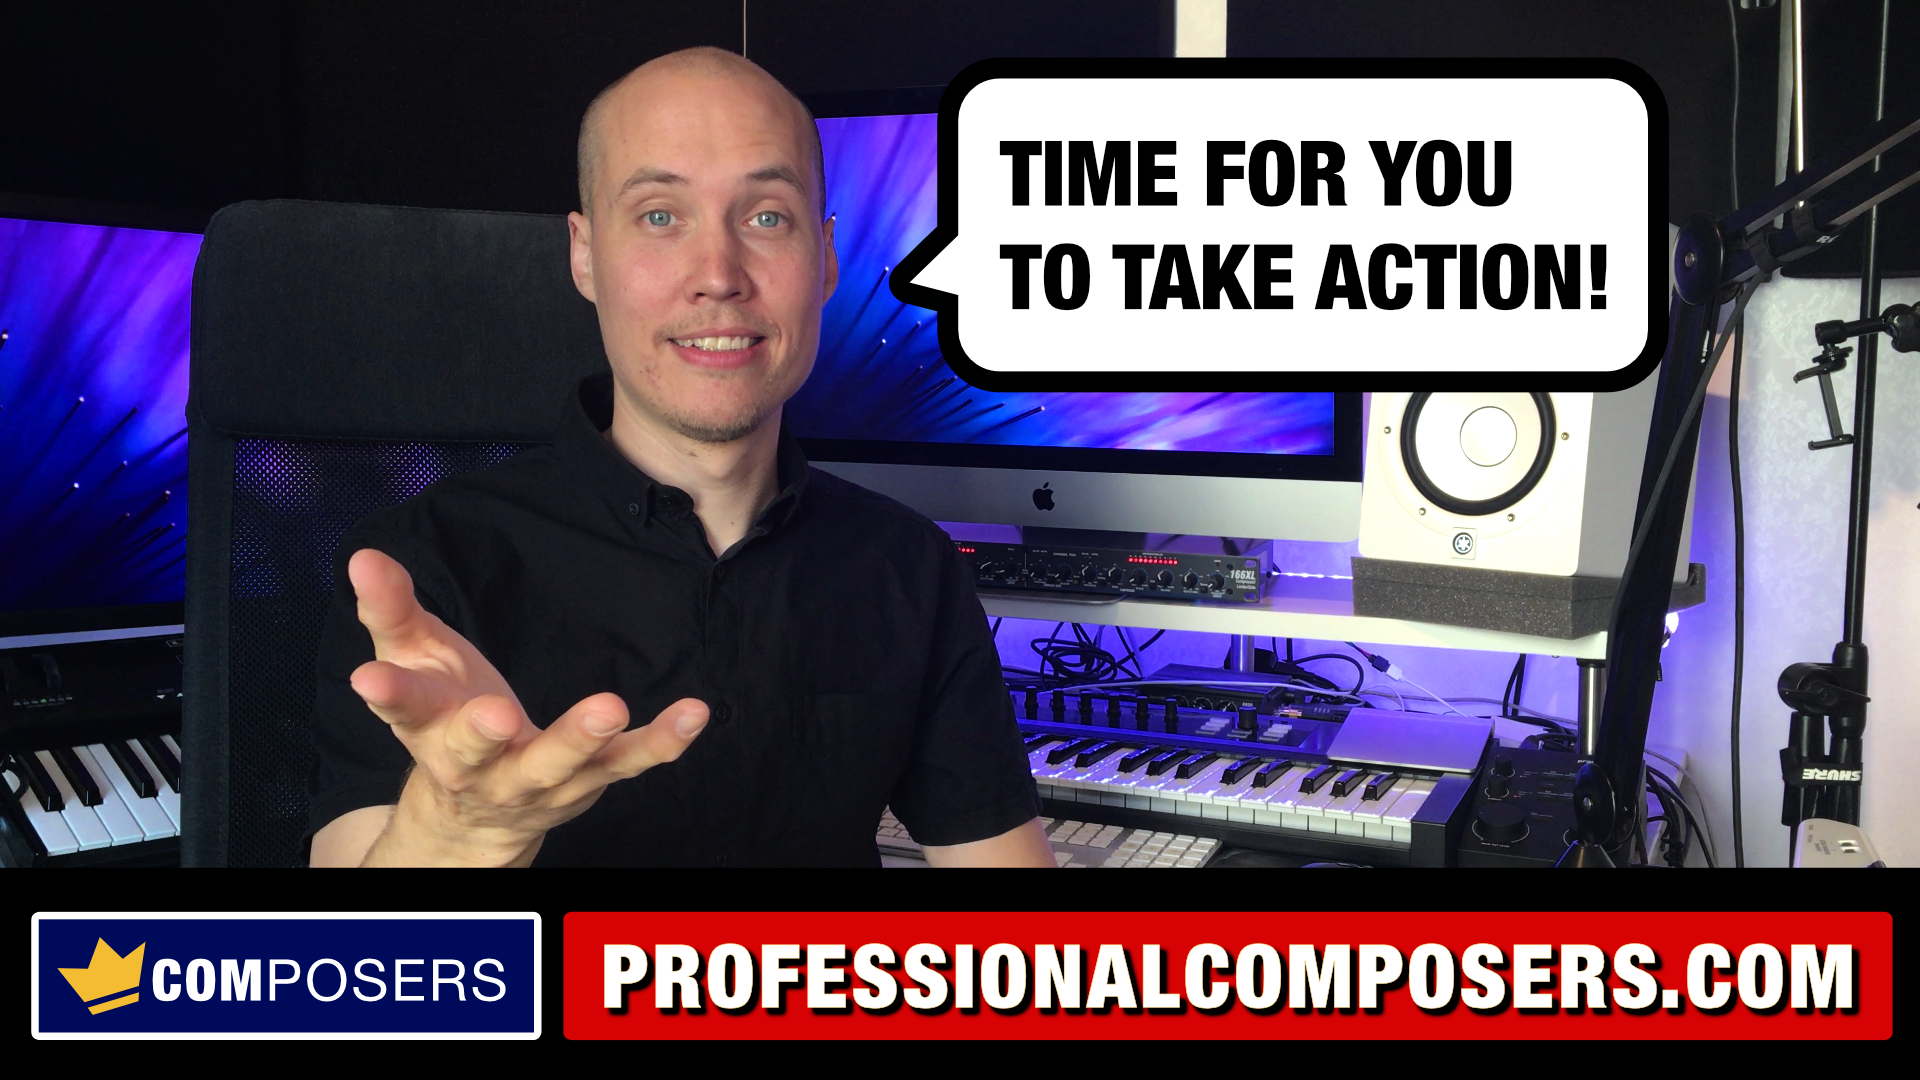 Professional Composers - Take Action